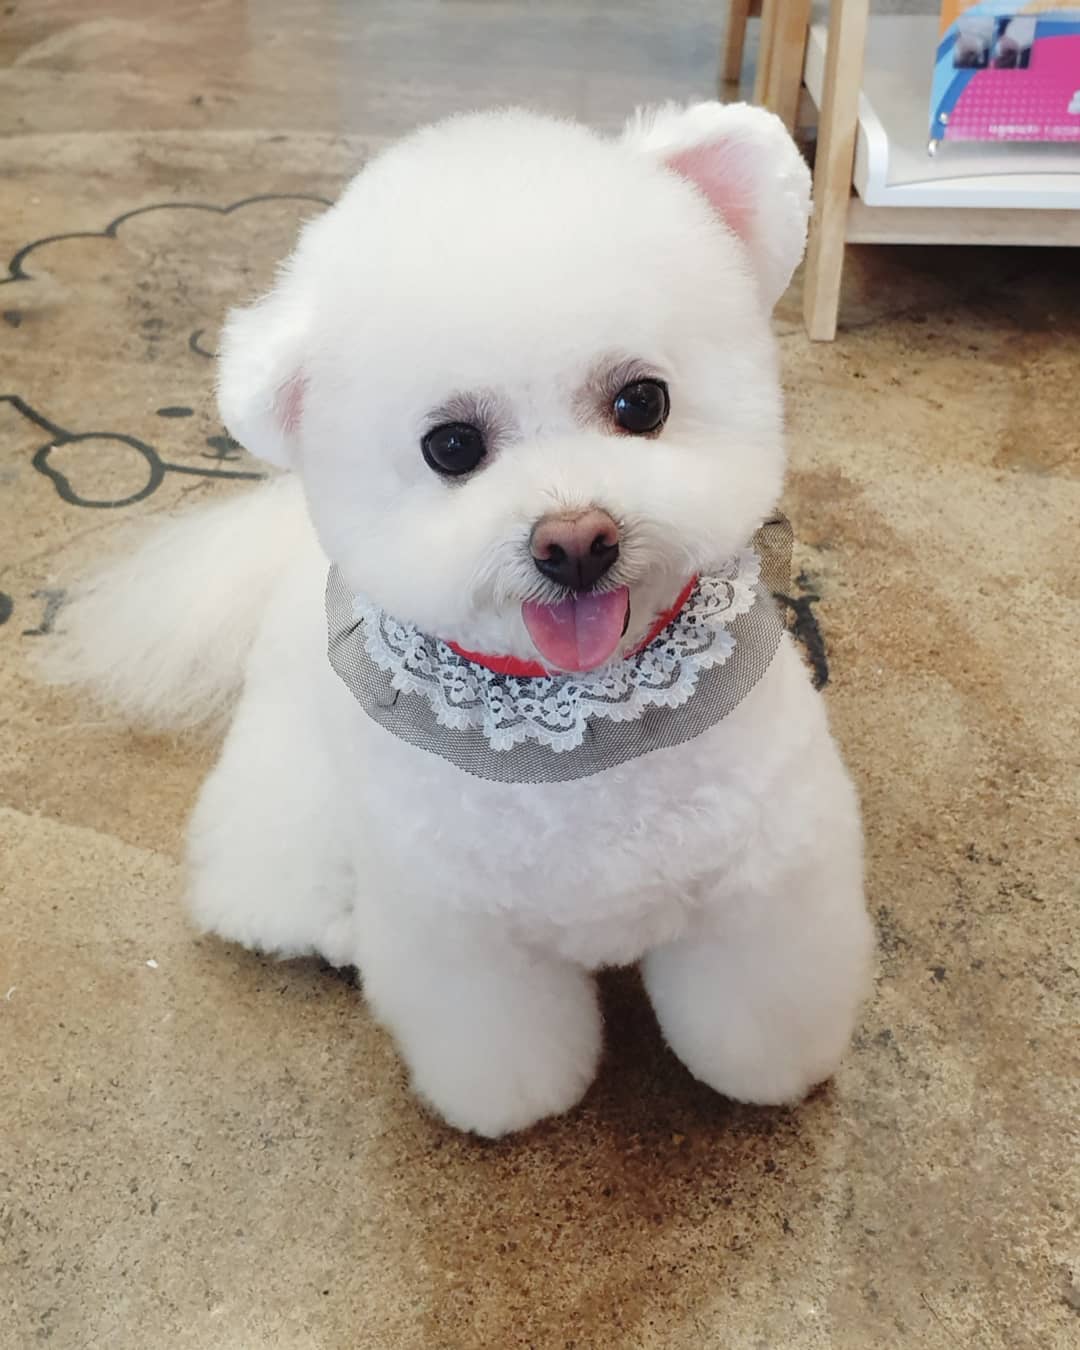 adorable Bichon Frise standing on the floor sticking its tongue out with its one ear up and the other one down